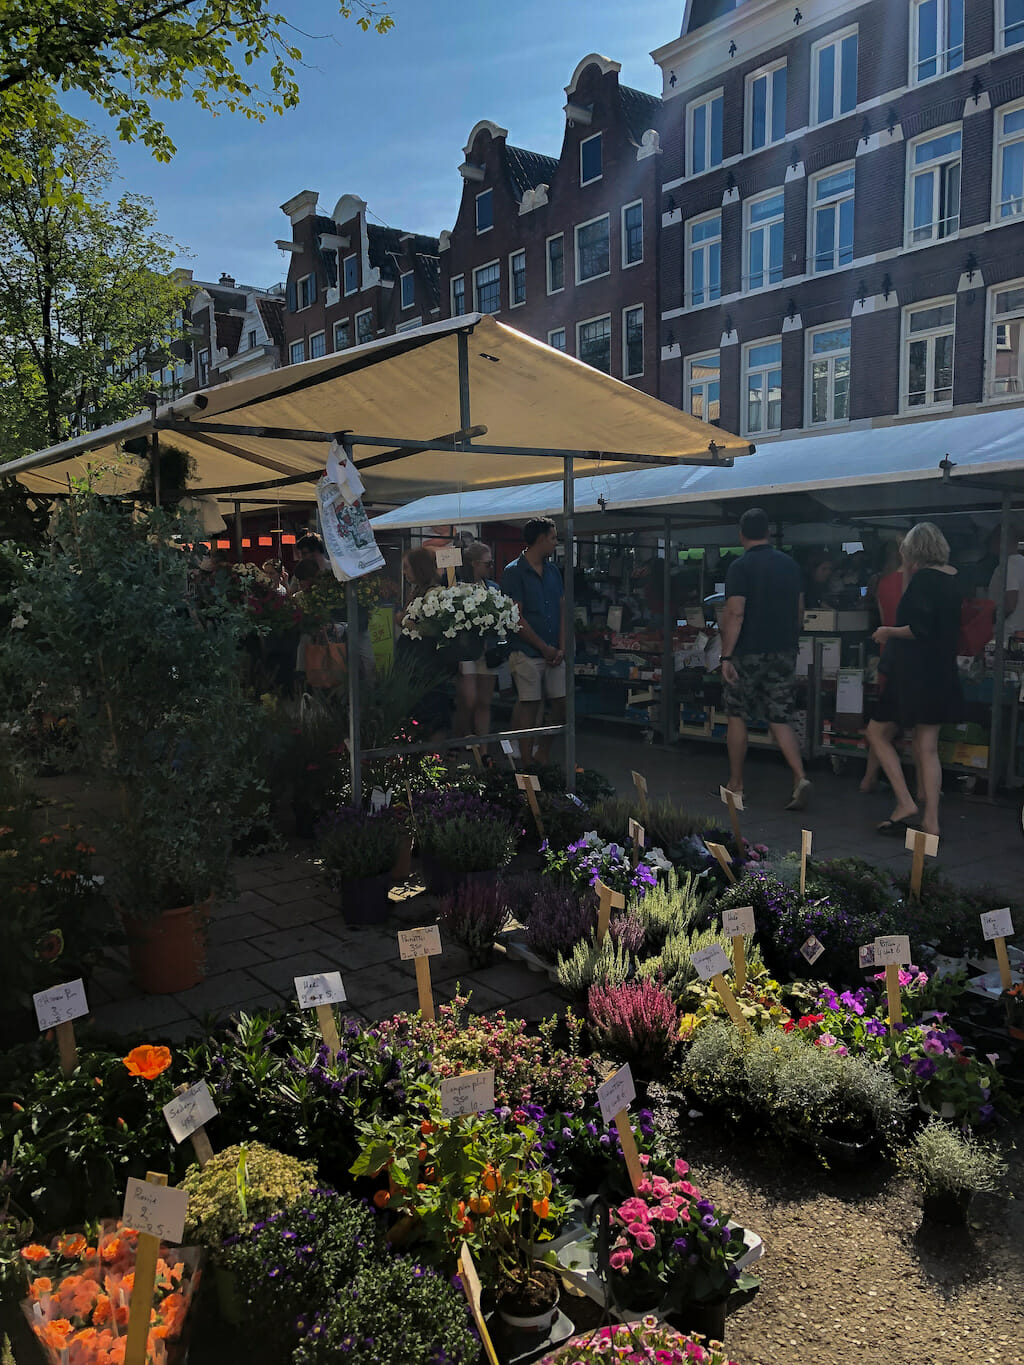 A lush of a plethora of potted plants clumped together in a street market booth in Amsterdam